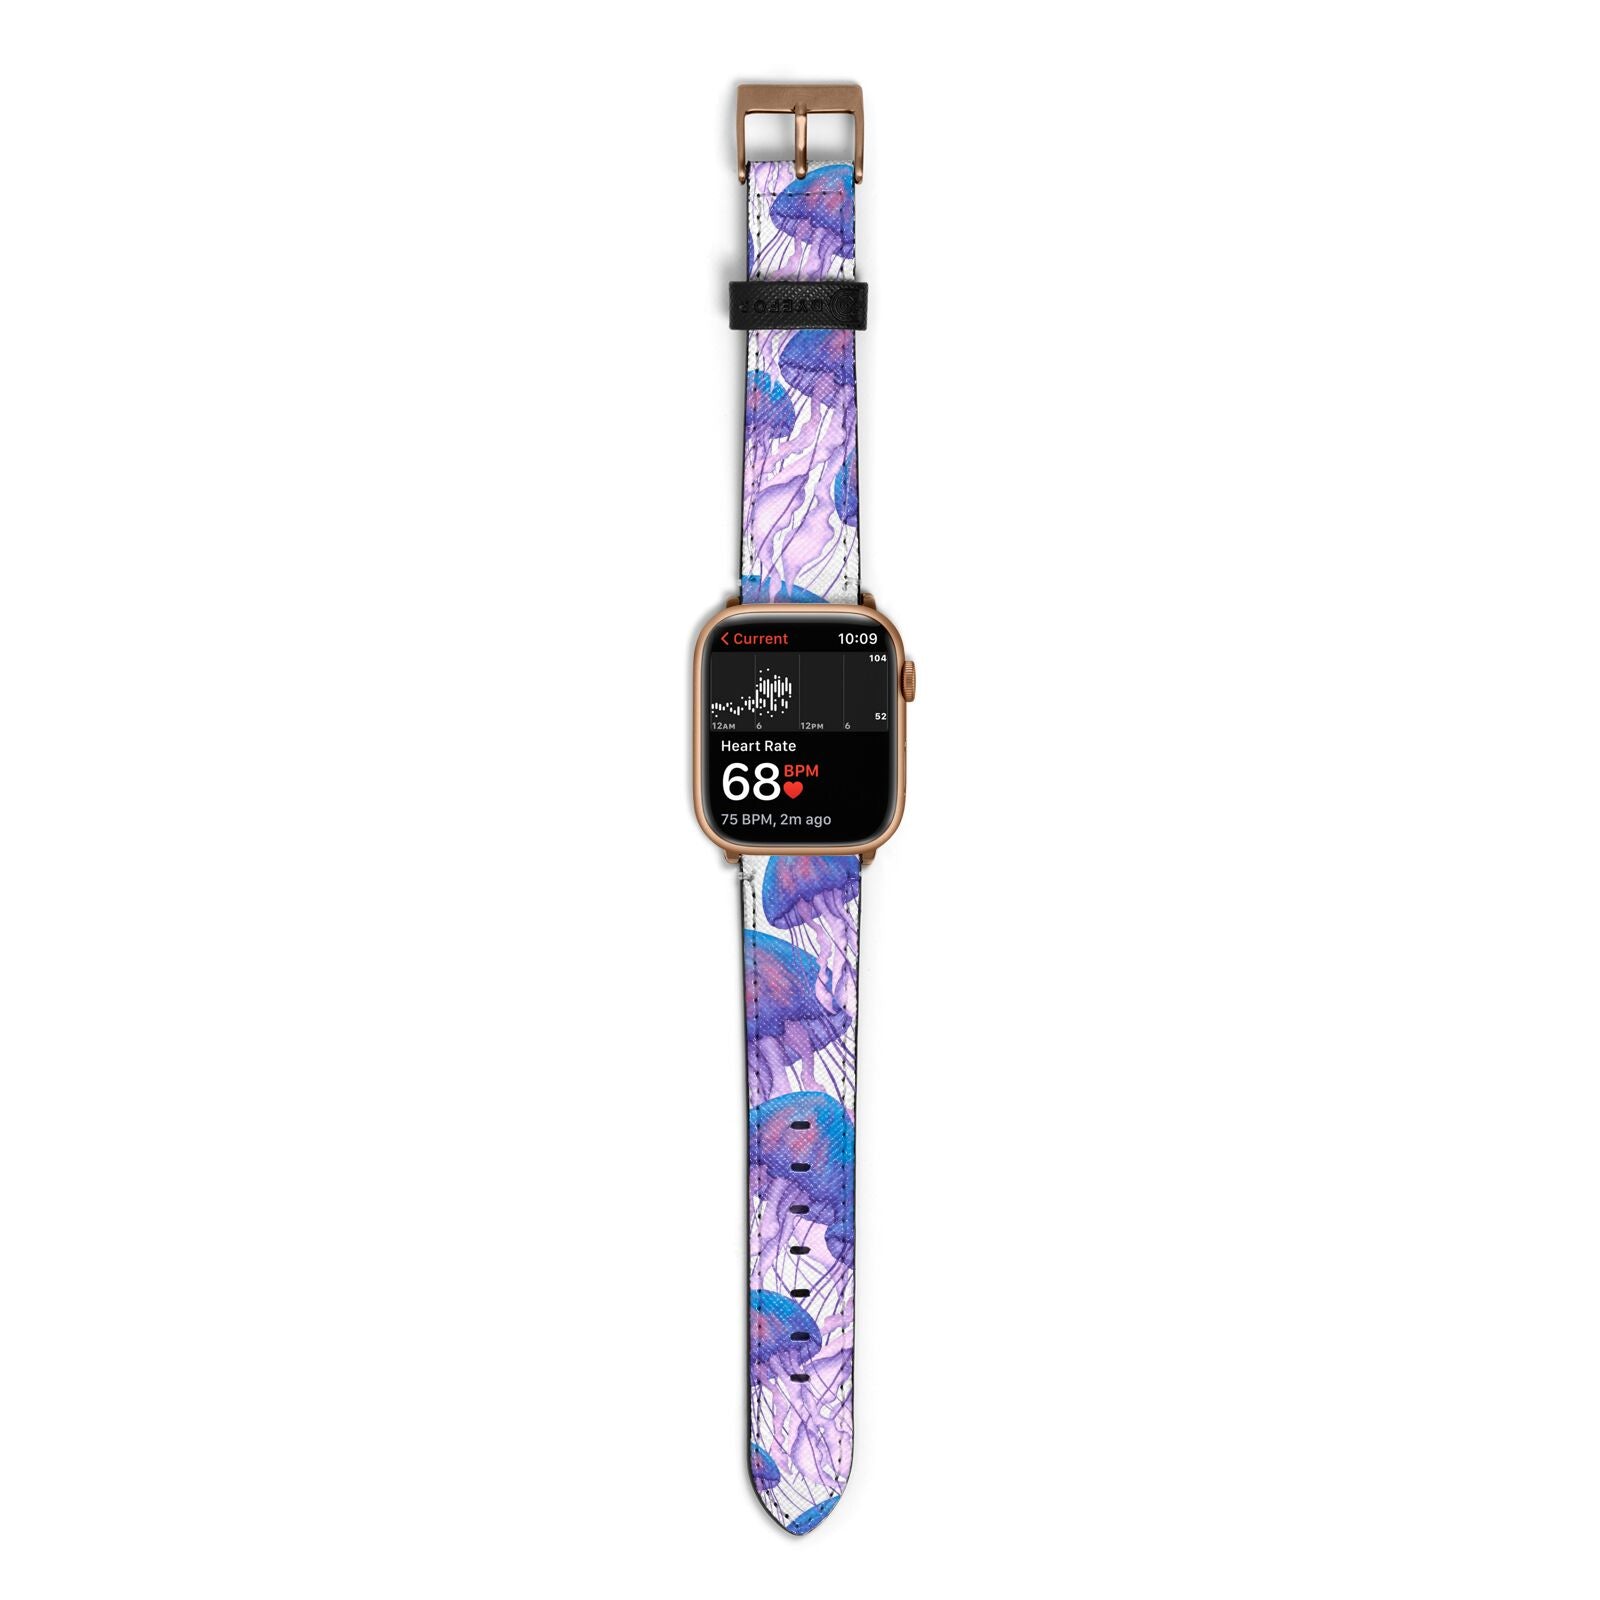 Jellyfish Apple Watch Strap Size 38mm with Gold Hardware